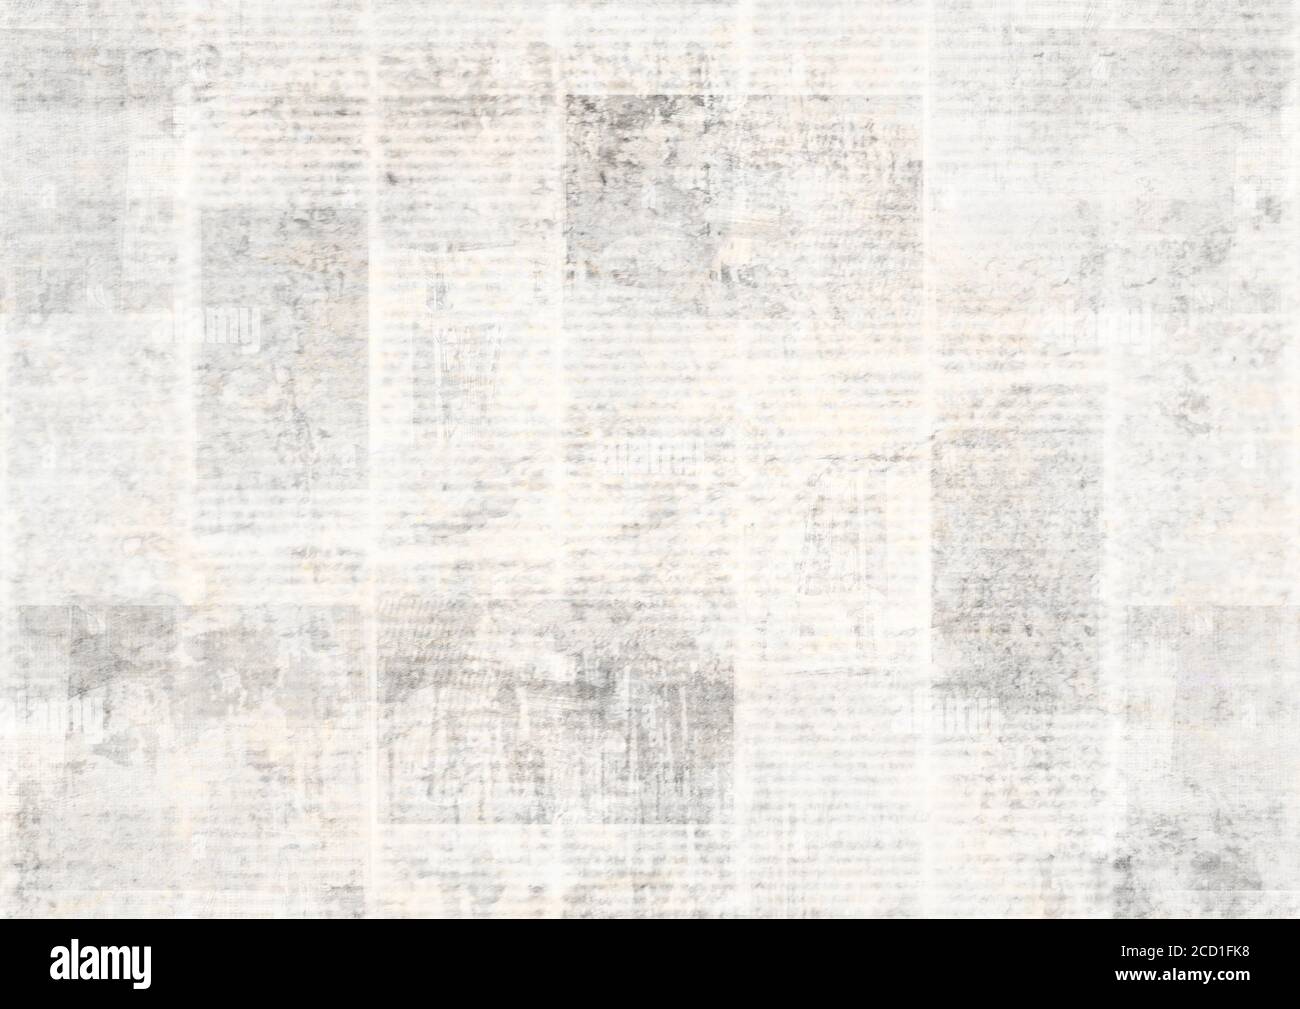 Old Newspaper Paper Grunge Texture Background Blurred Vintage Newspapers Textured Backdrop Blur Unreadable Aged News Horizontal Page With Place For Stock Photo Alamy